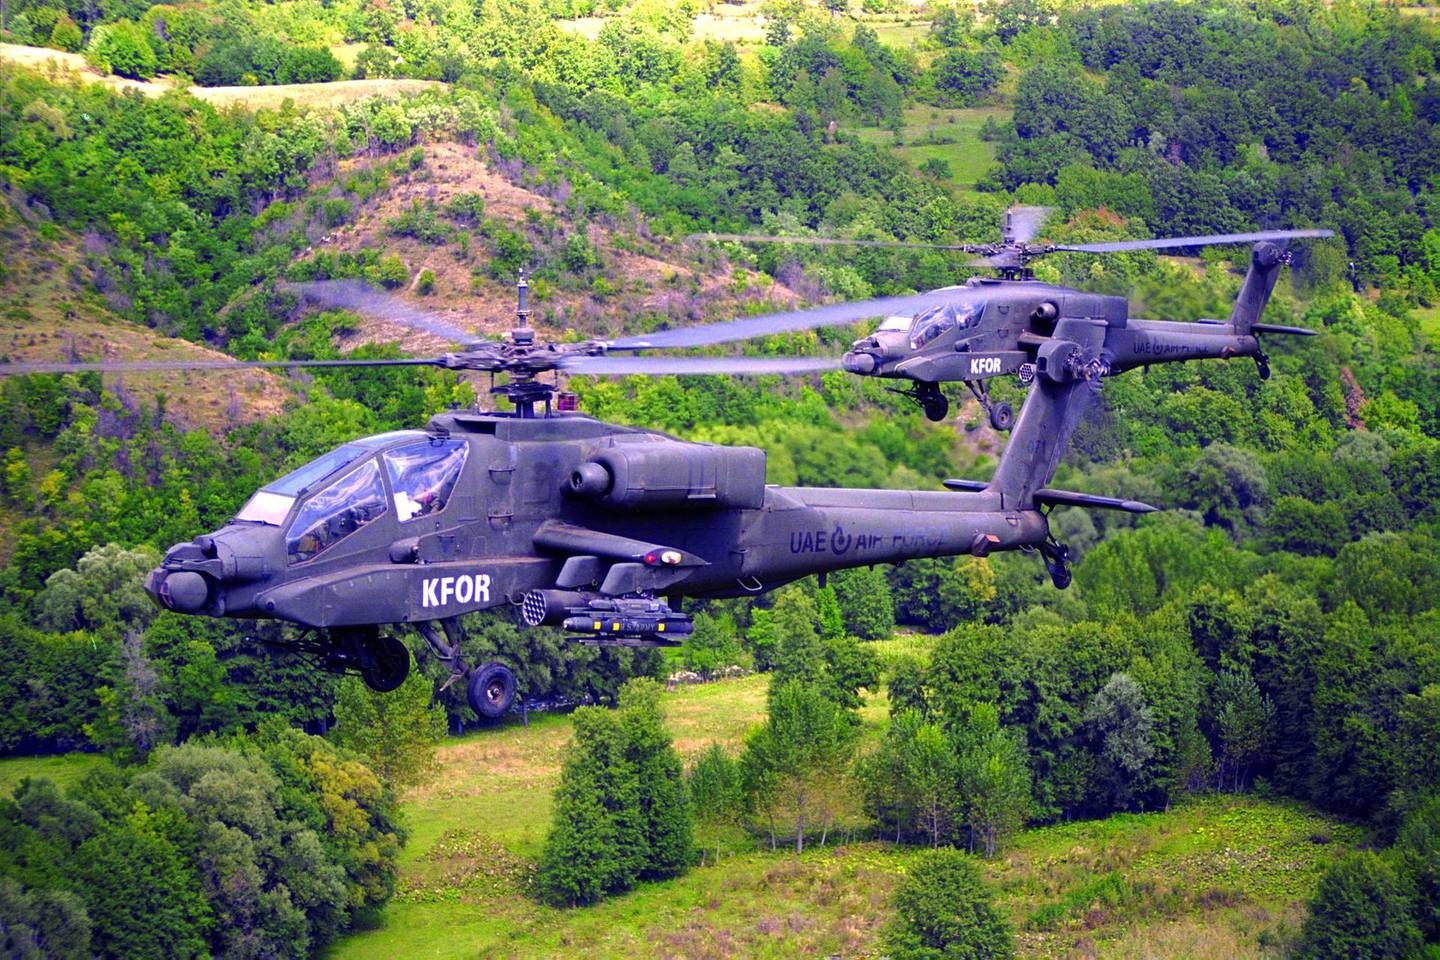 Two Emirati attack helicopters fly over the countryside bearing the Kfor markings of the Nato-led peacekeeping mission. Courtesy: Maj Gen Obaid Al Ketbi